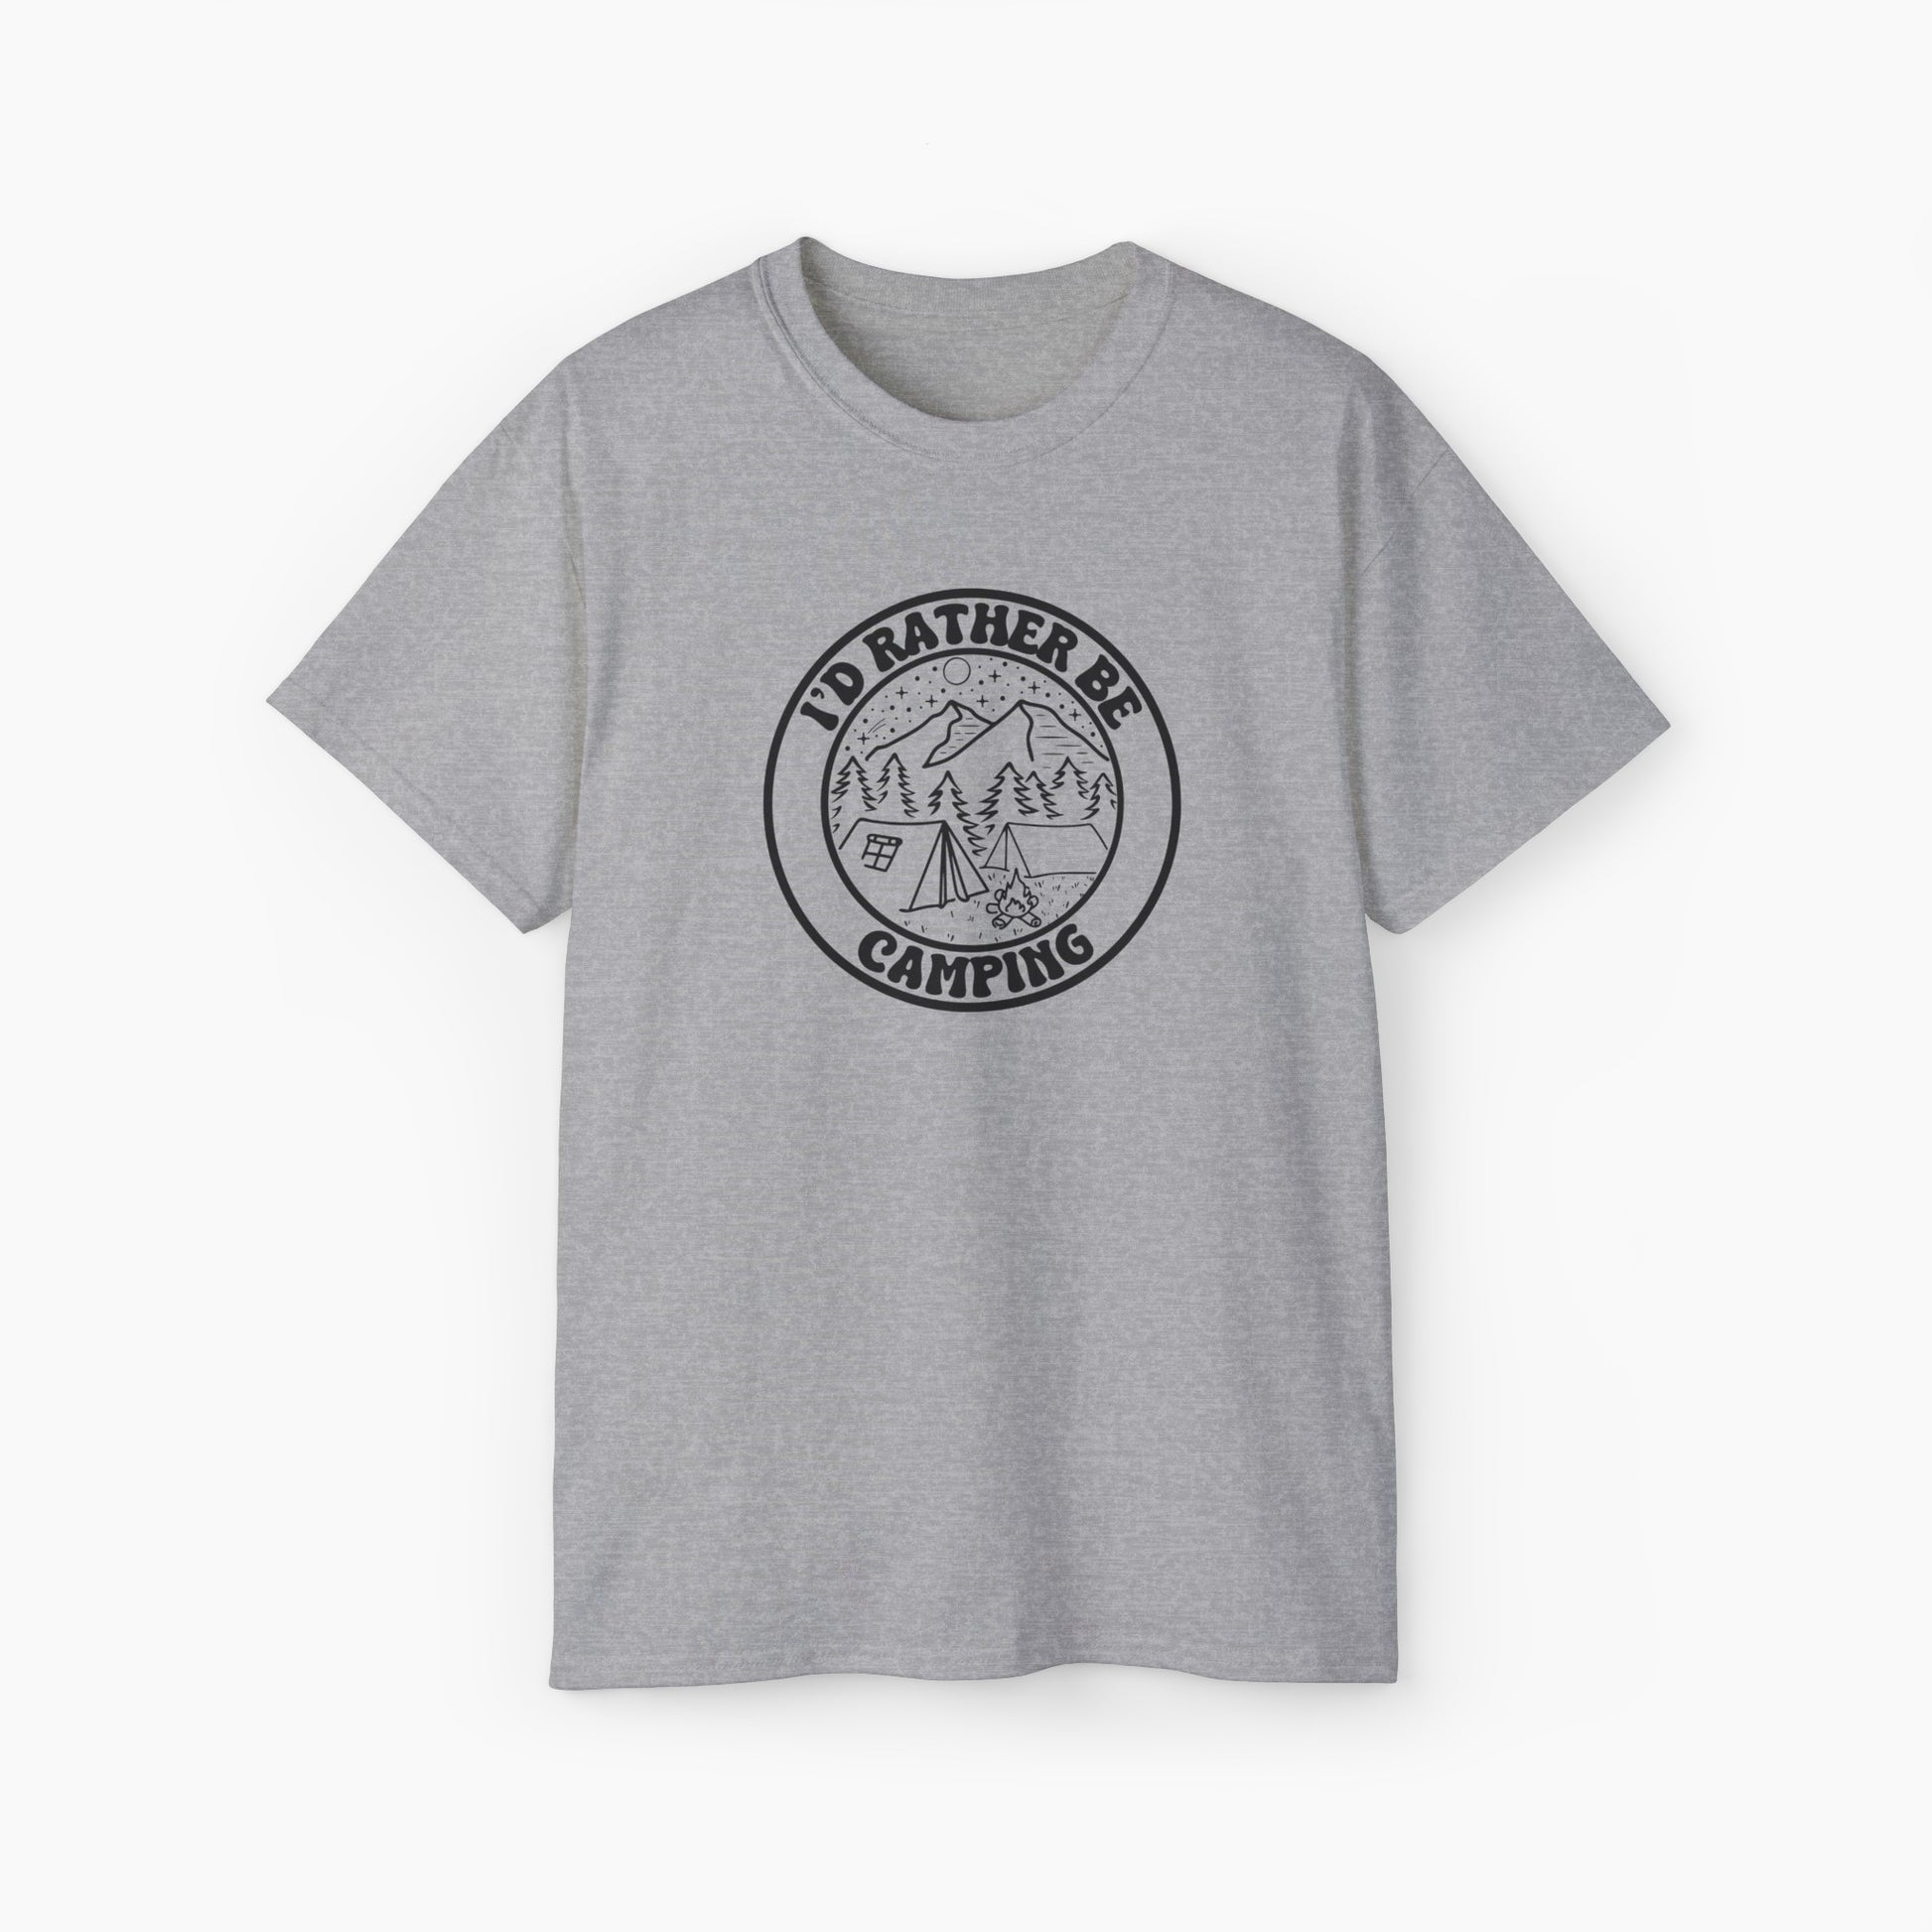 Grey t-shirt featuring a minimalistic circular design with the text 'I'd rather be camping,' including a tent, campfire, trees, and mountains.